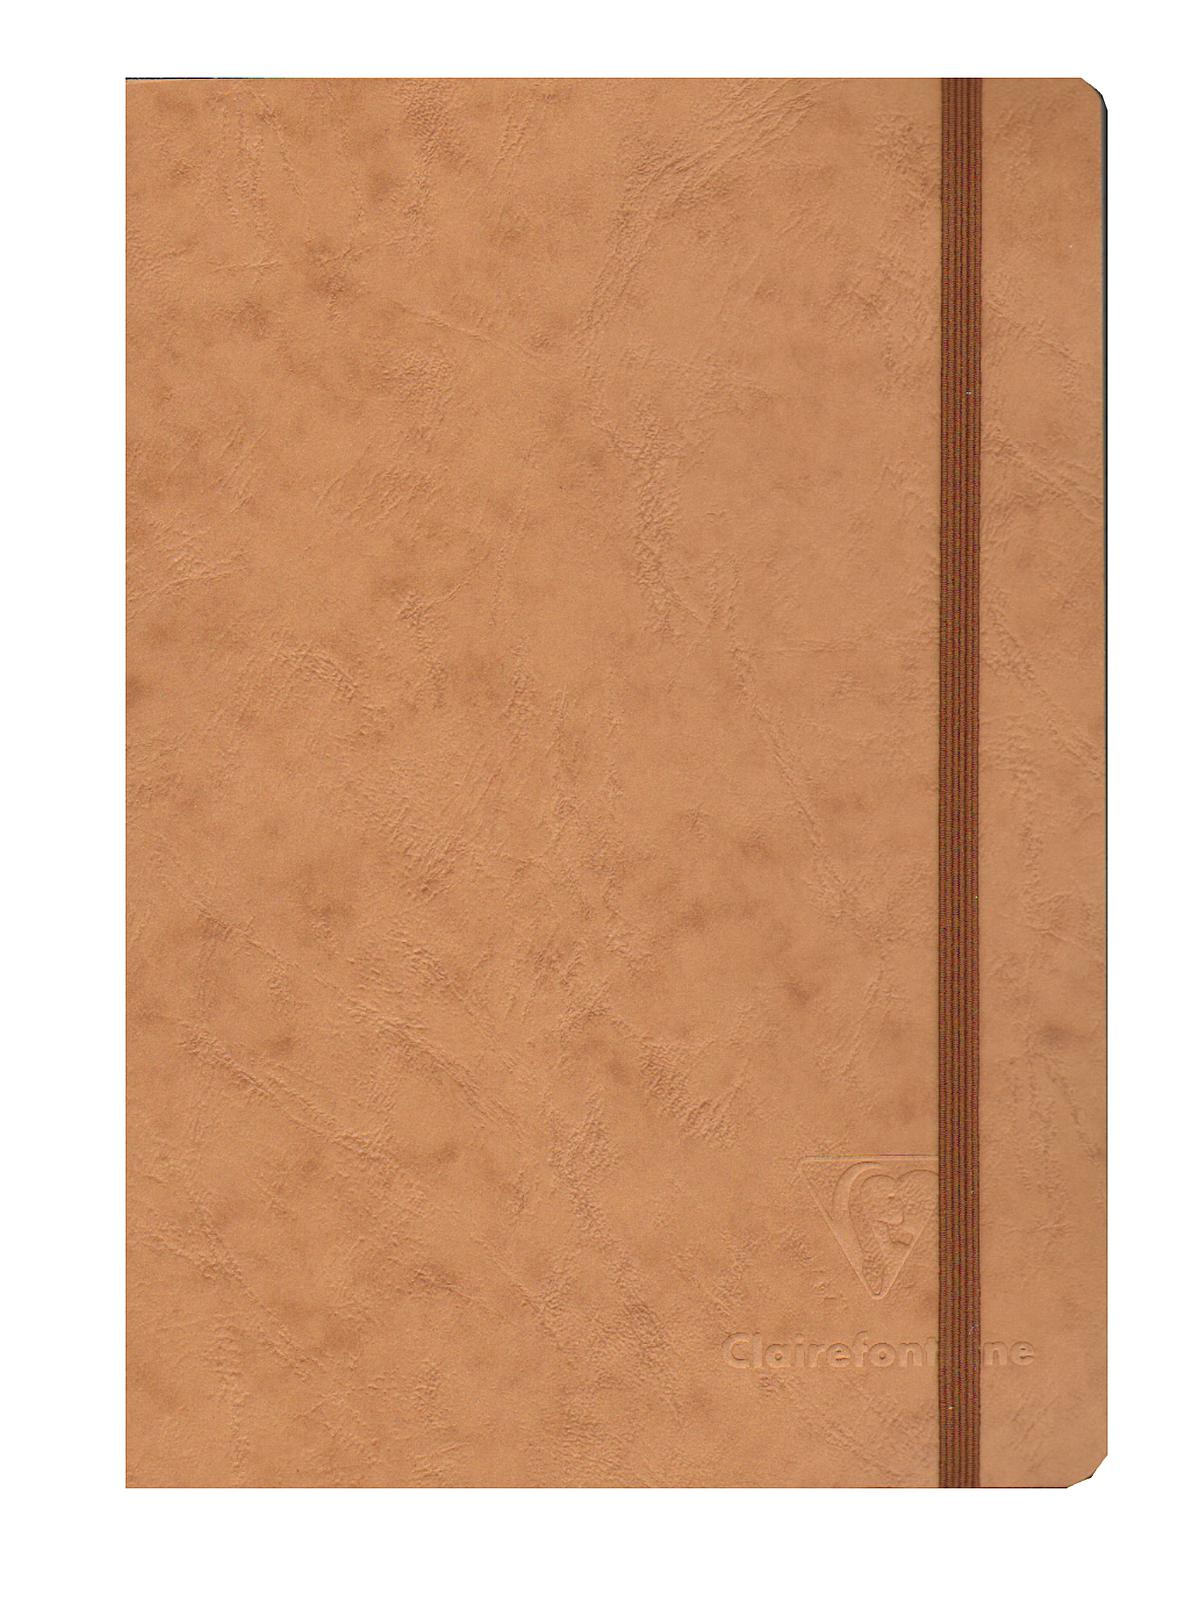 Cloth-bound Notebooks 6 In. X 8 1 4 In. Ruled, Tan Cover, Elastic Closure 96 Sheets